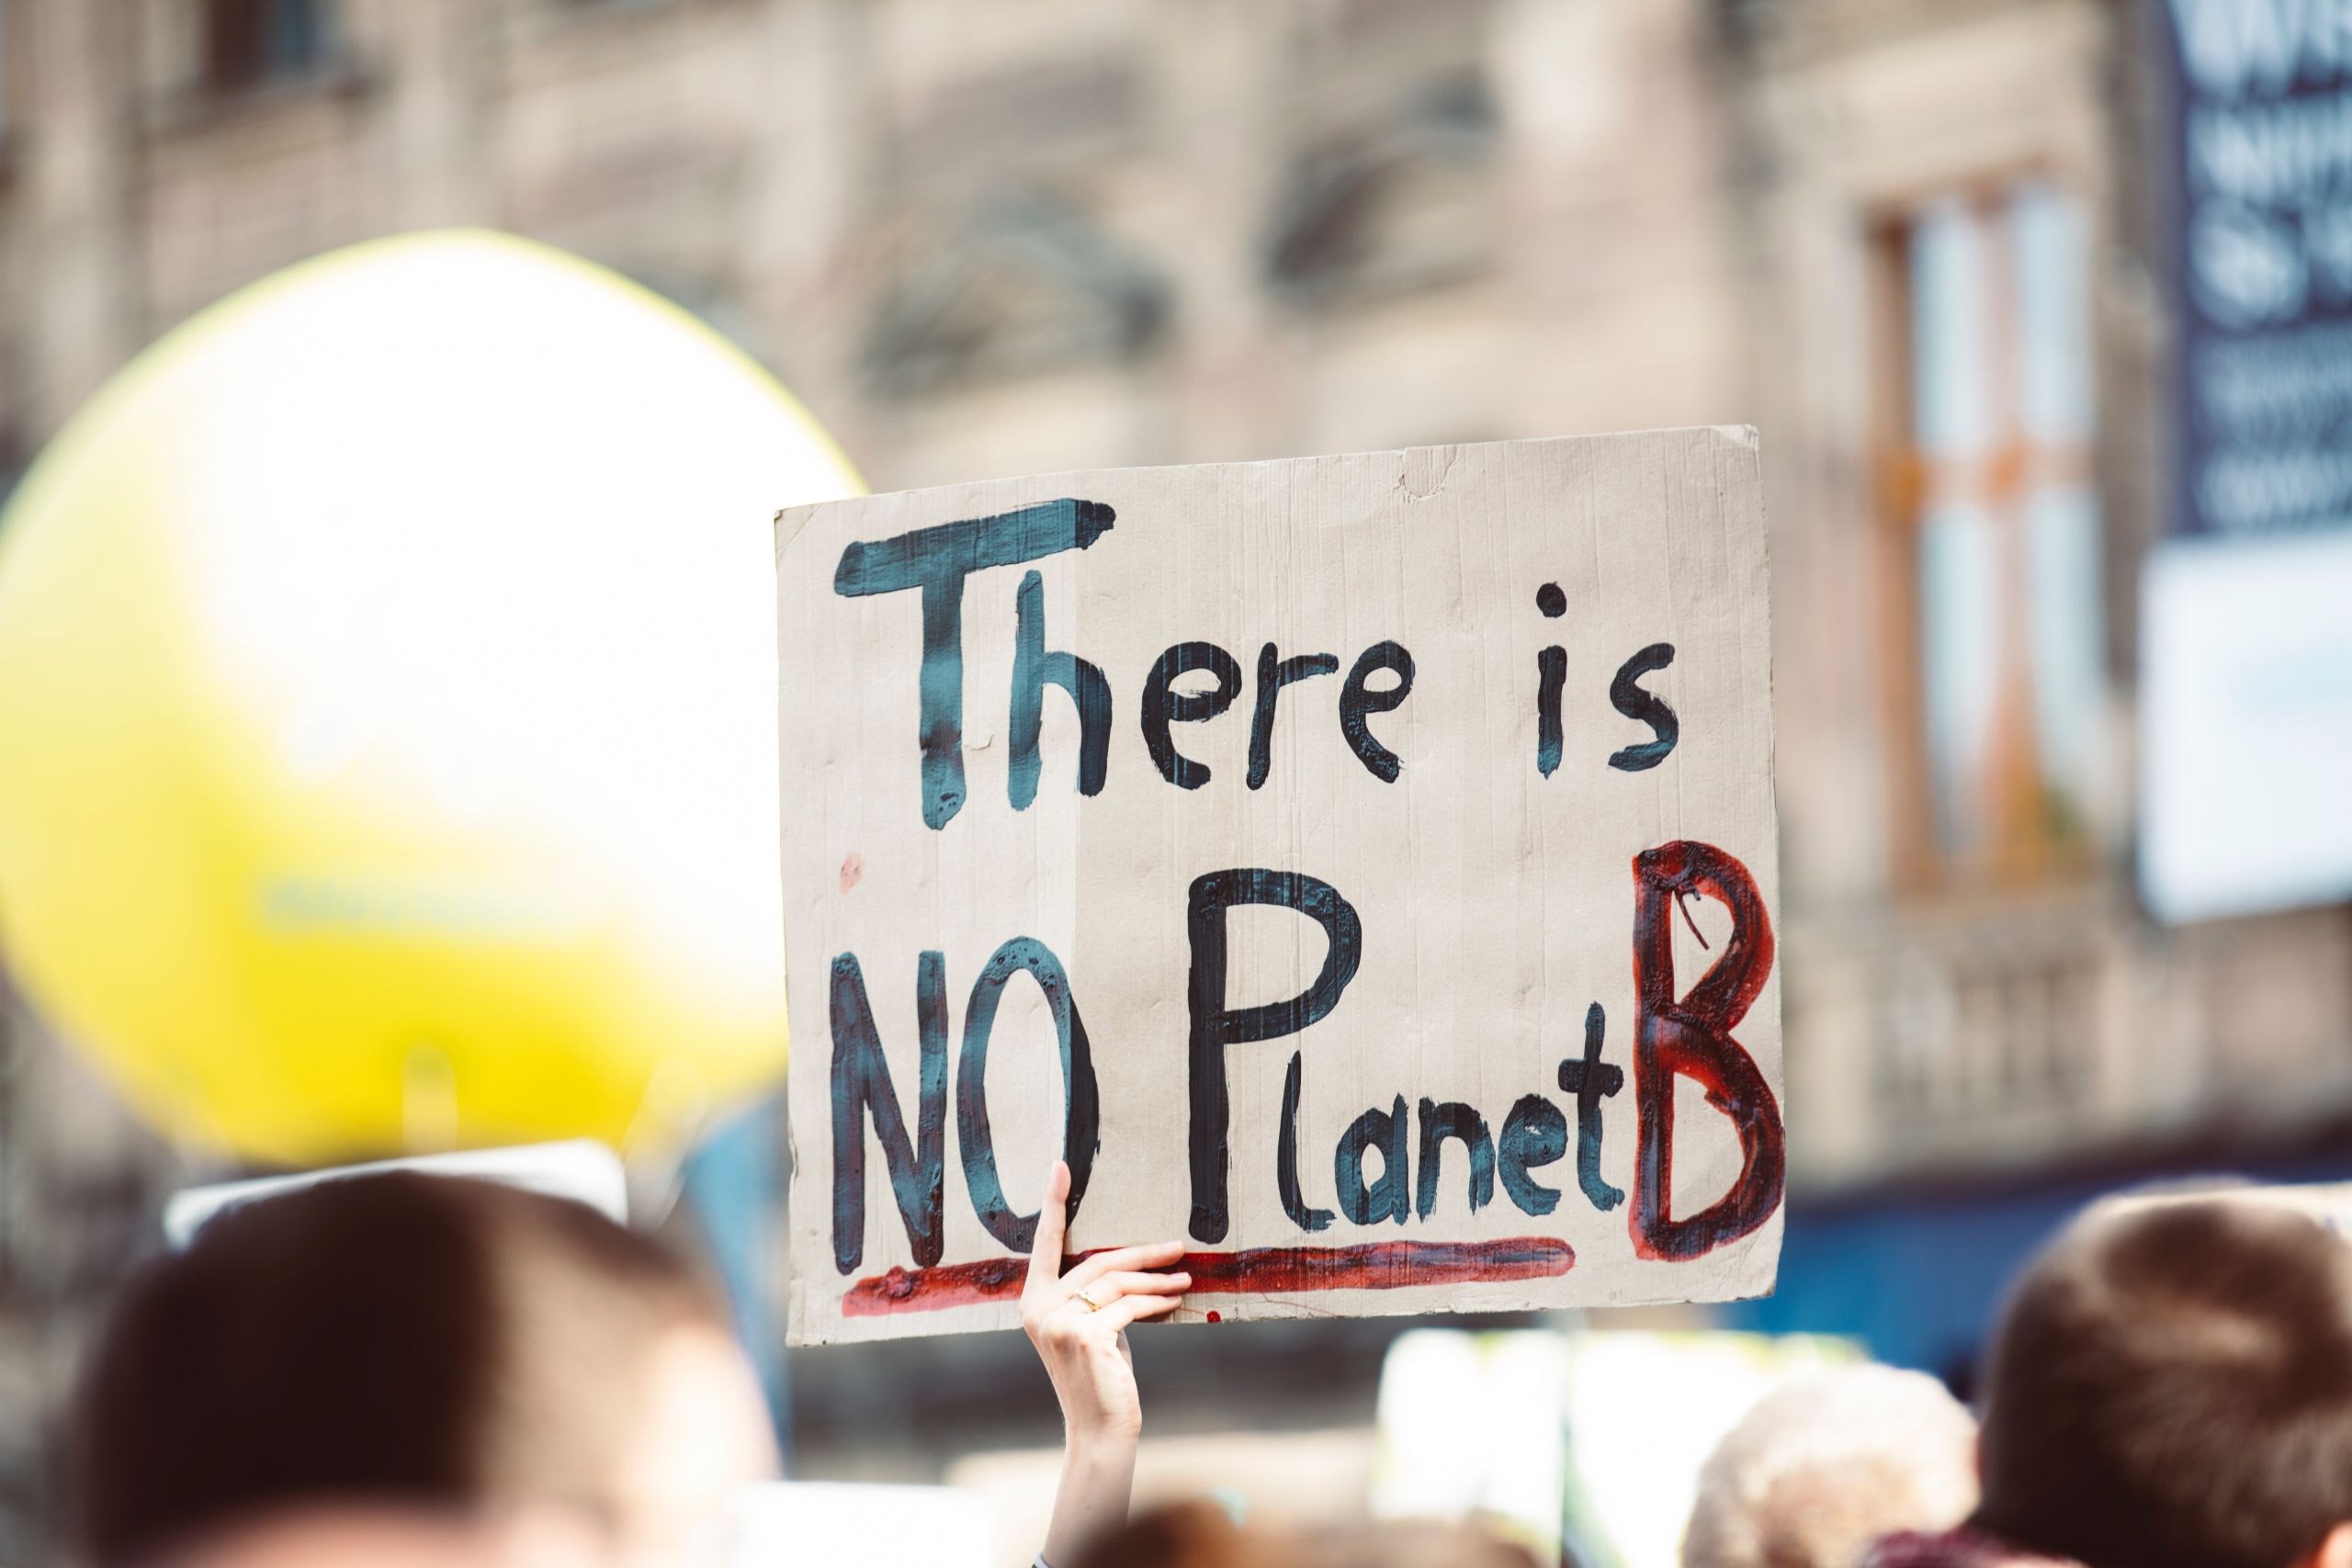 Placard which reads "There is no Planet B"